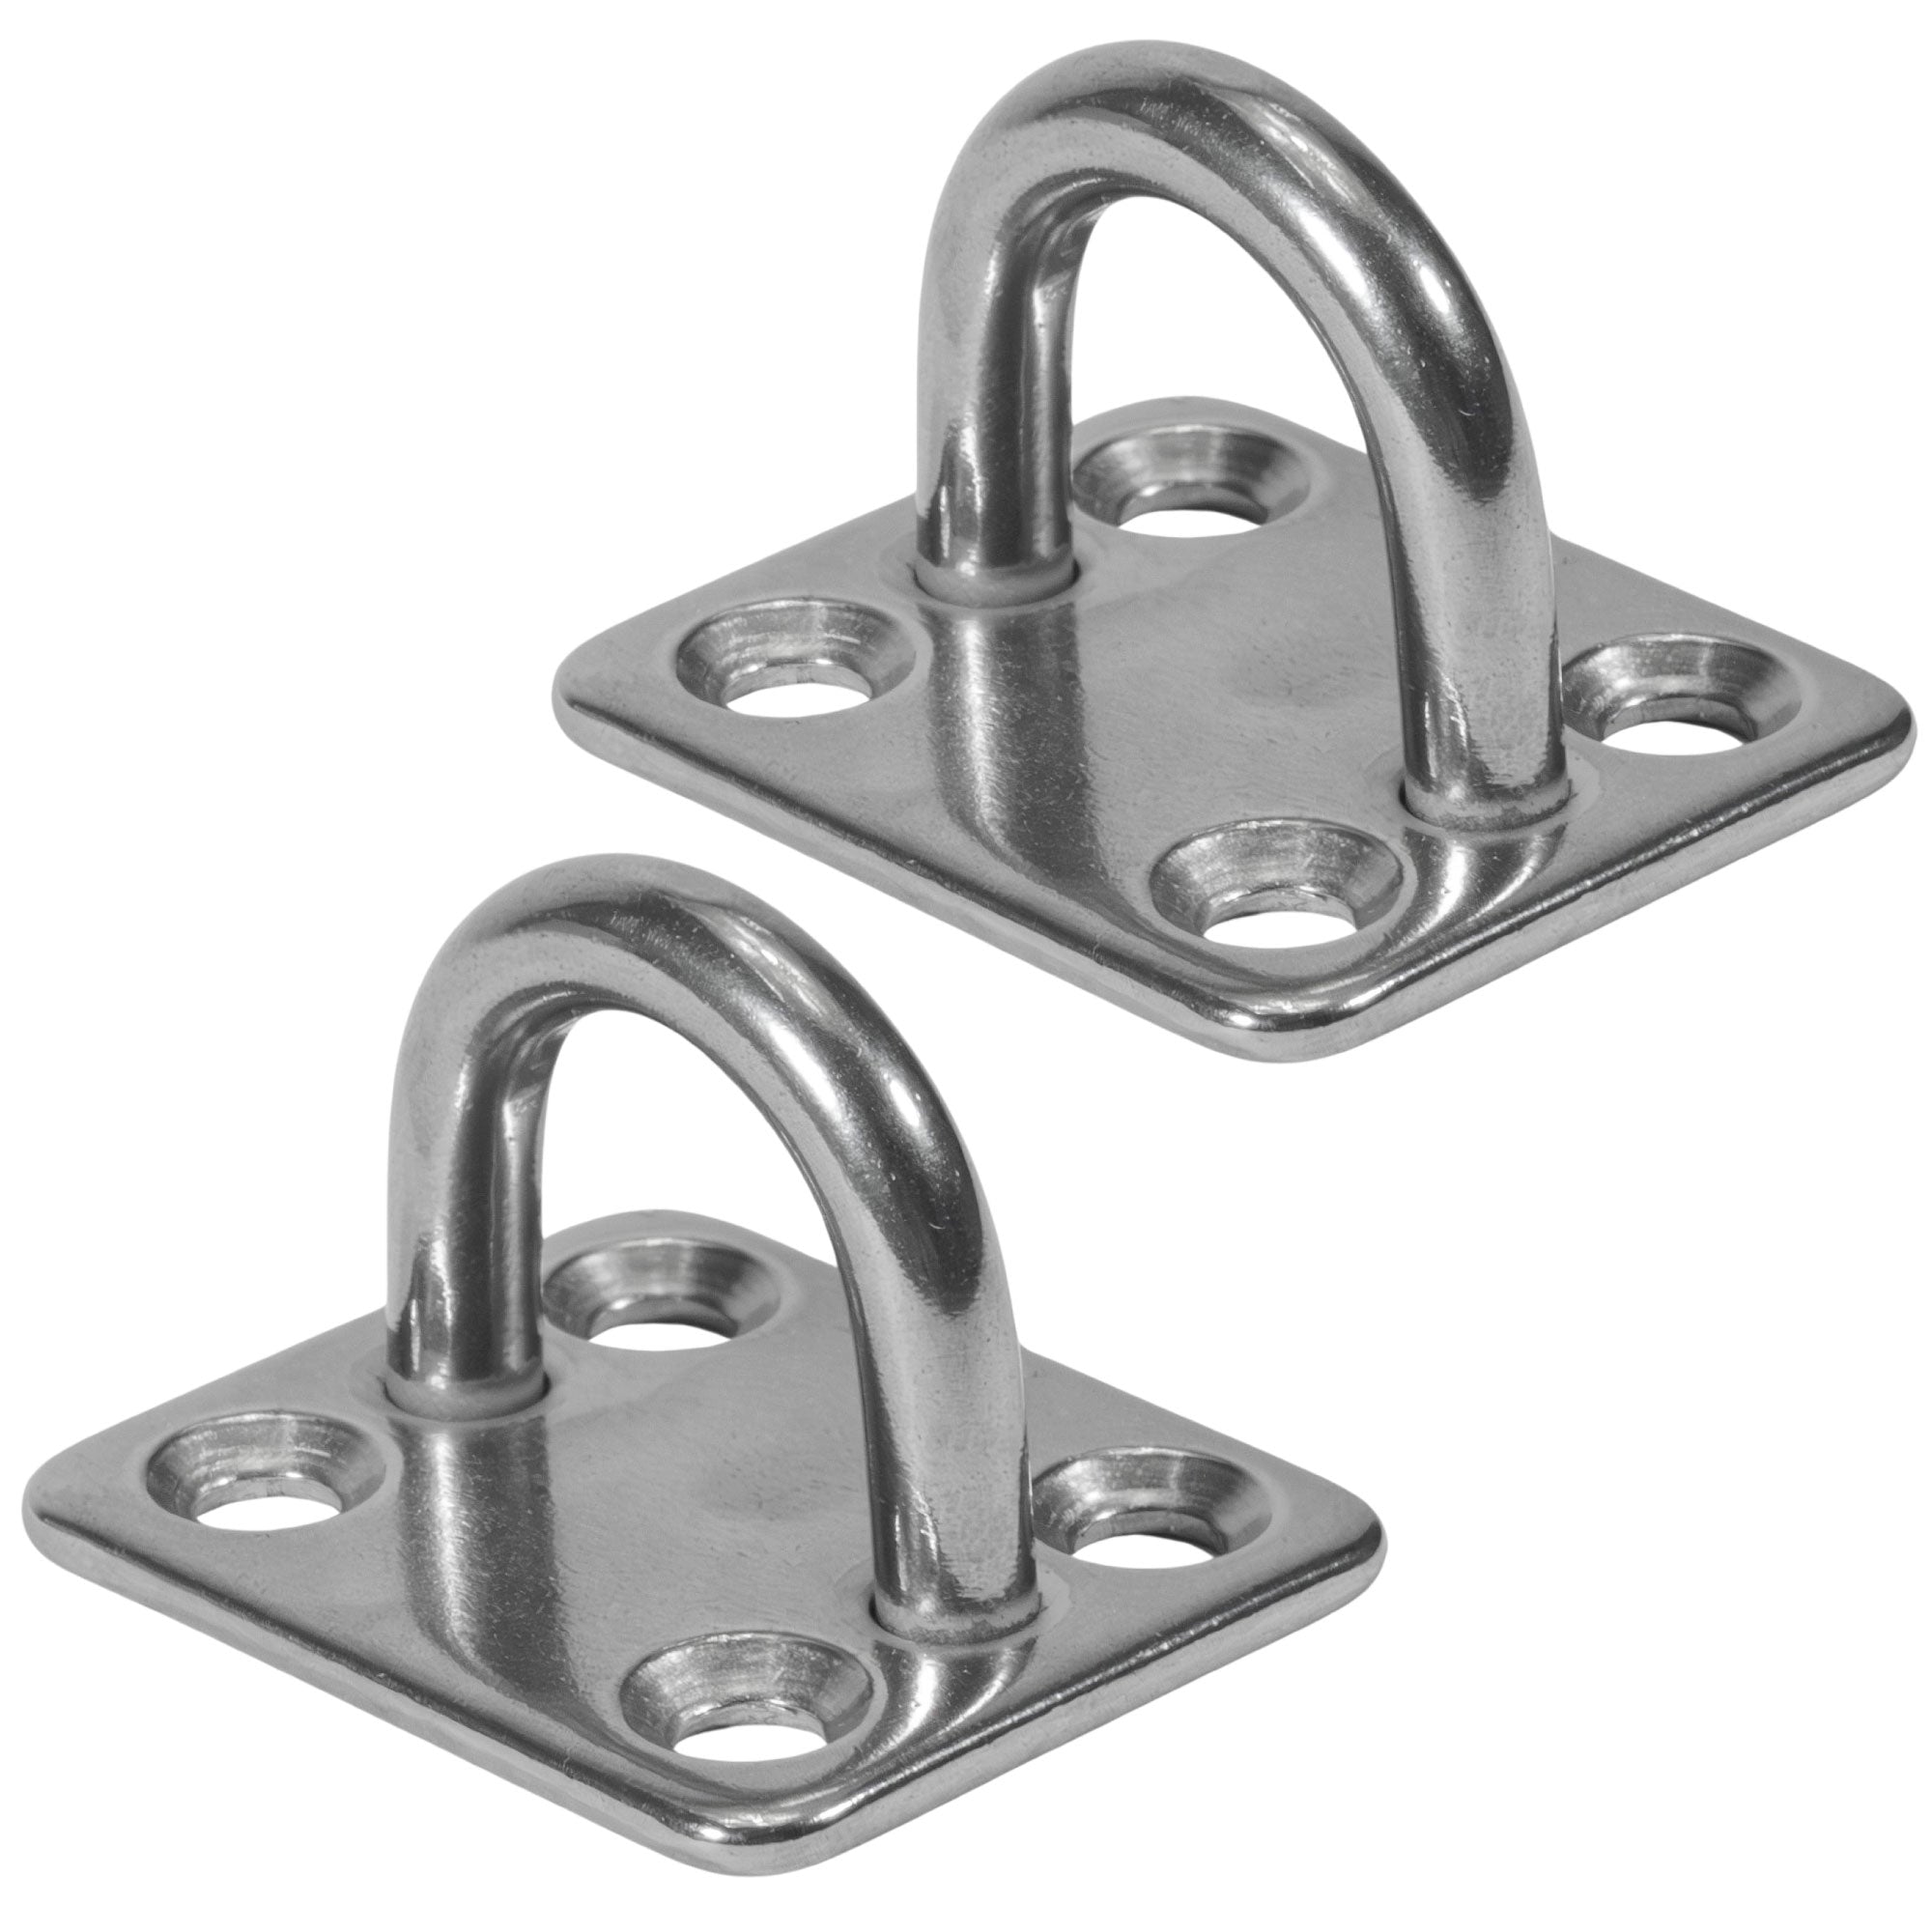 Heavy Duty 3/16" Stainless Steel Square Pad Eye, 2-Pack - FO2099-M2